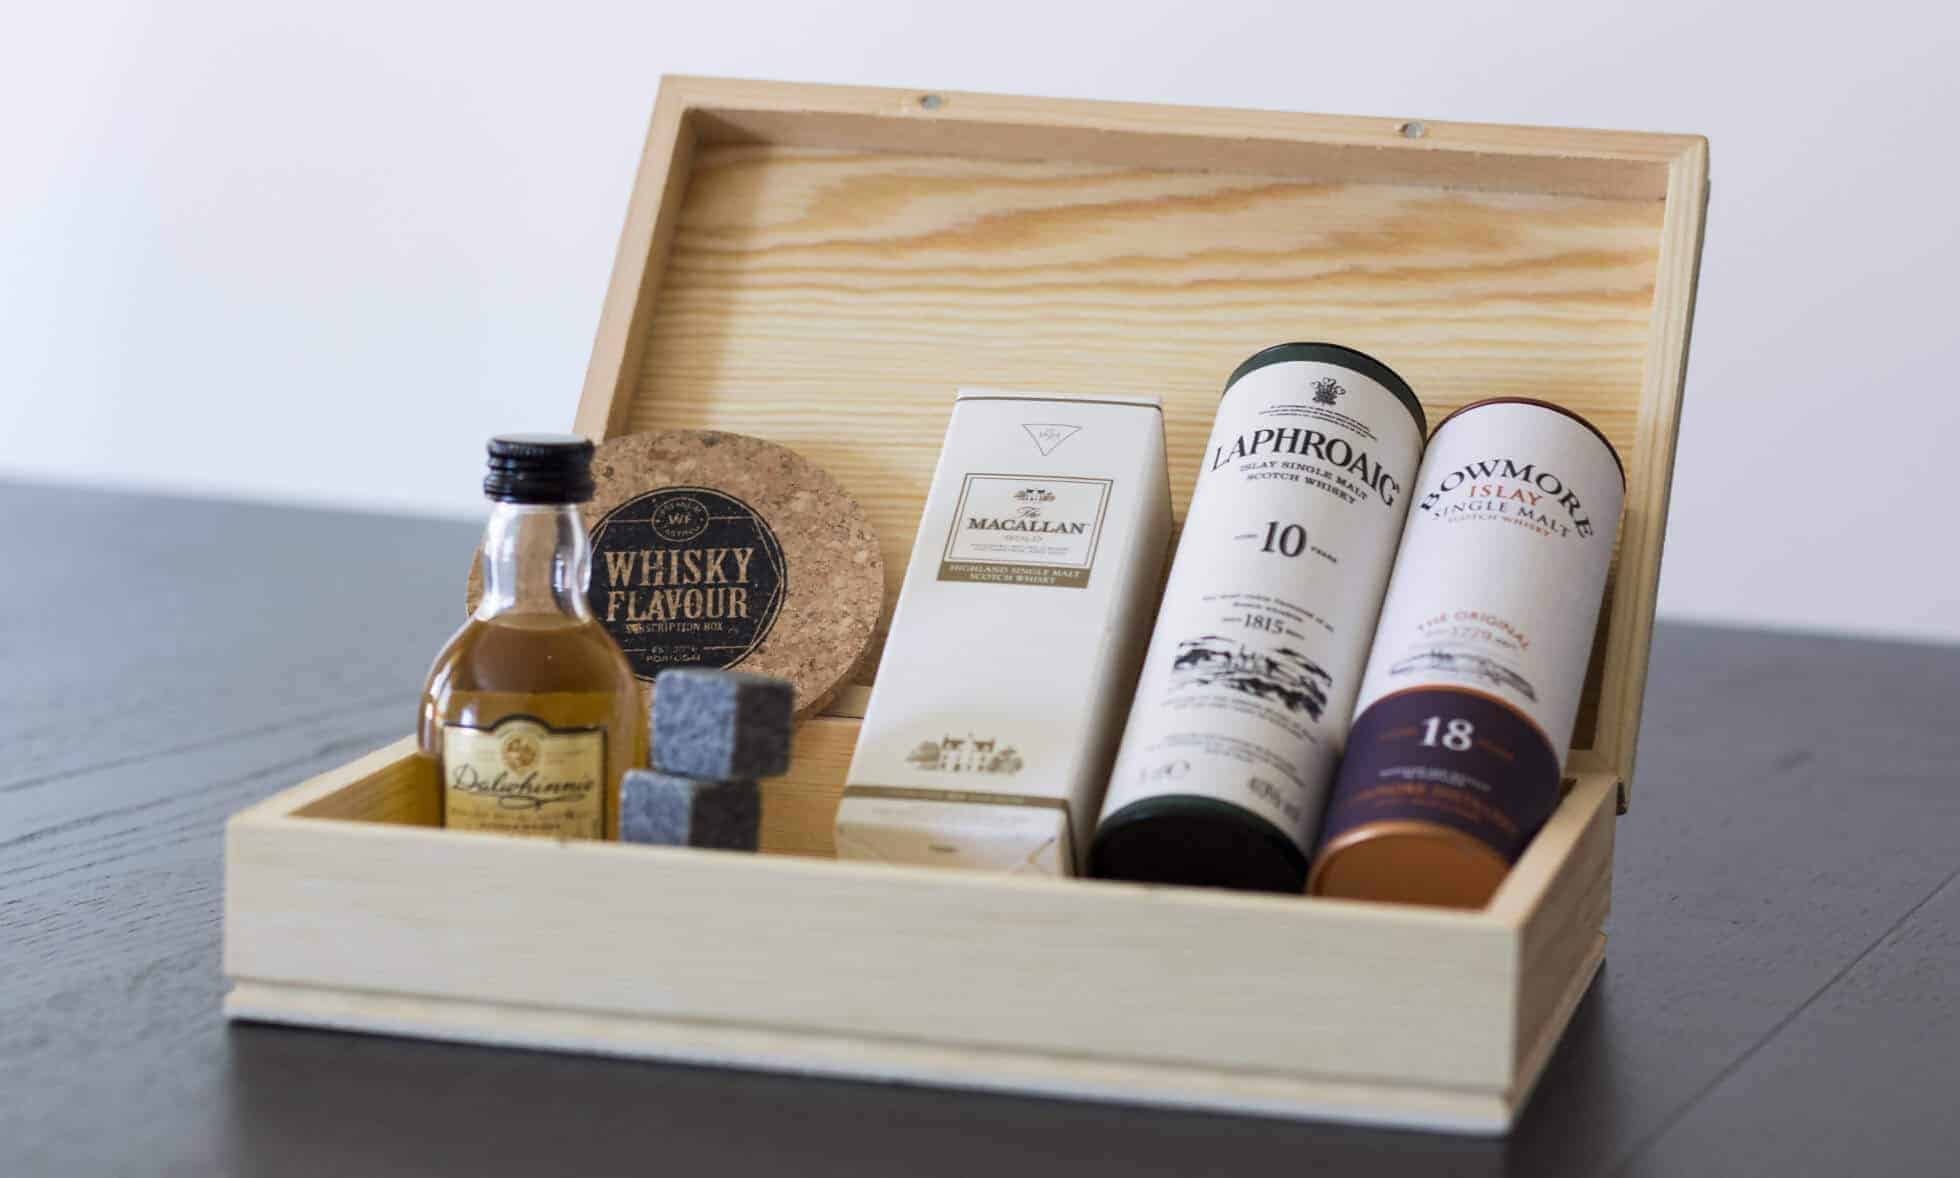 What to expect in a Whisky Flavour Subscription